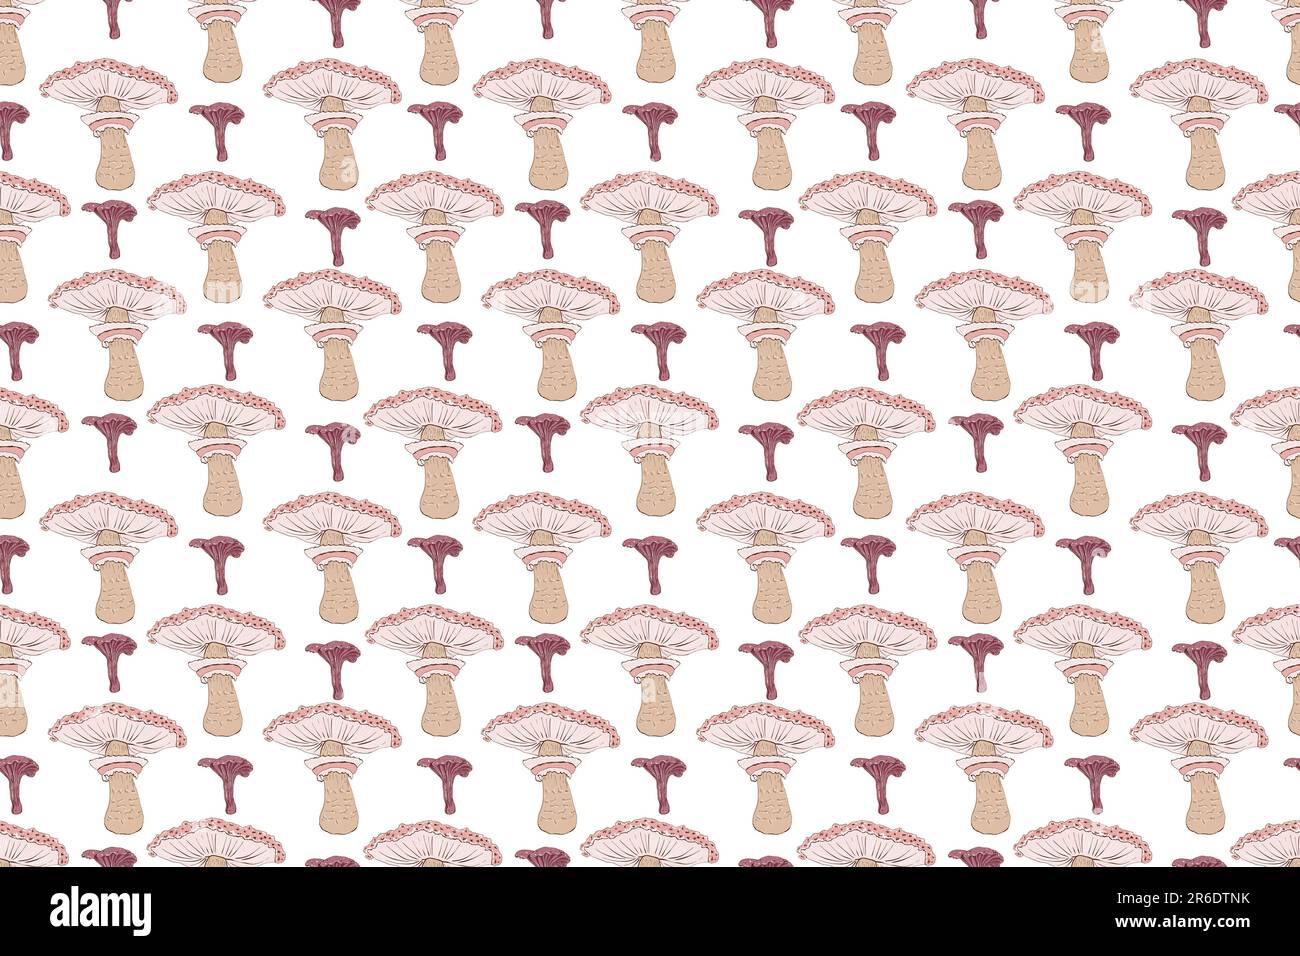 Seamless pattern of mushrooms. Hand drawing illustration in cartoon style isolated on white Stock Photo